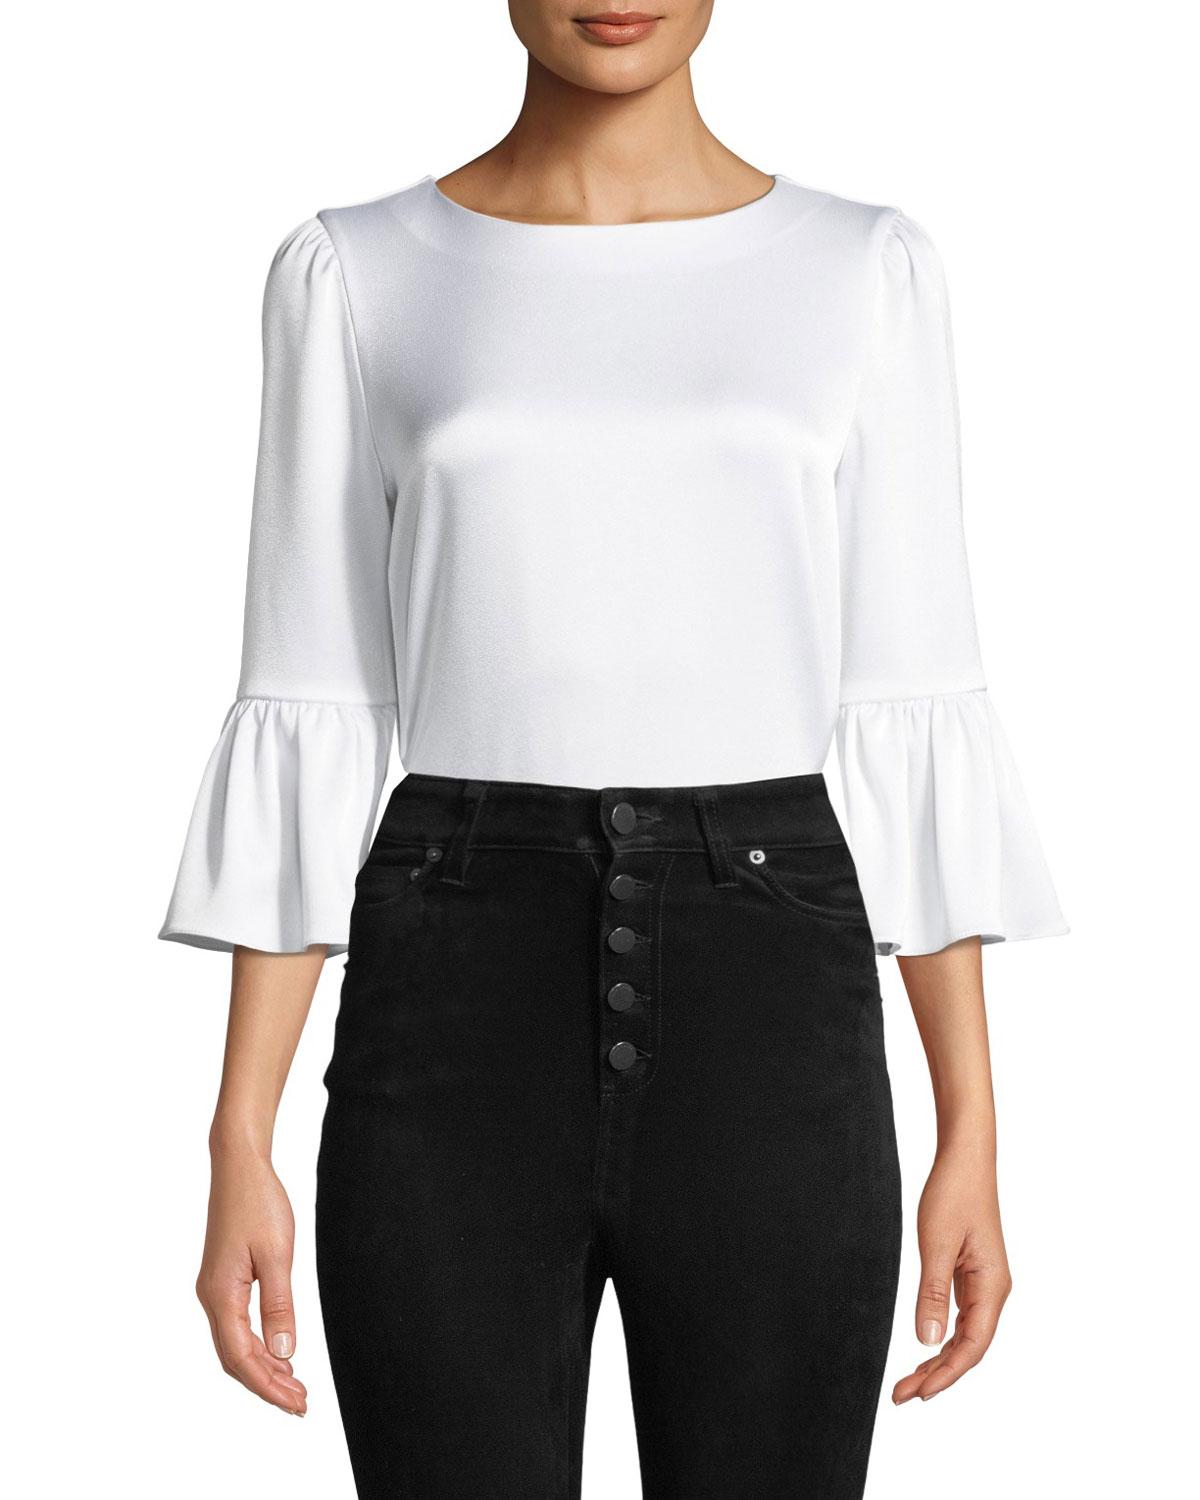 Alice + Olivia Synthetic Bernice Ruffle-sleeve Top in White - Lyst